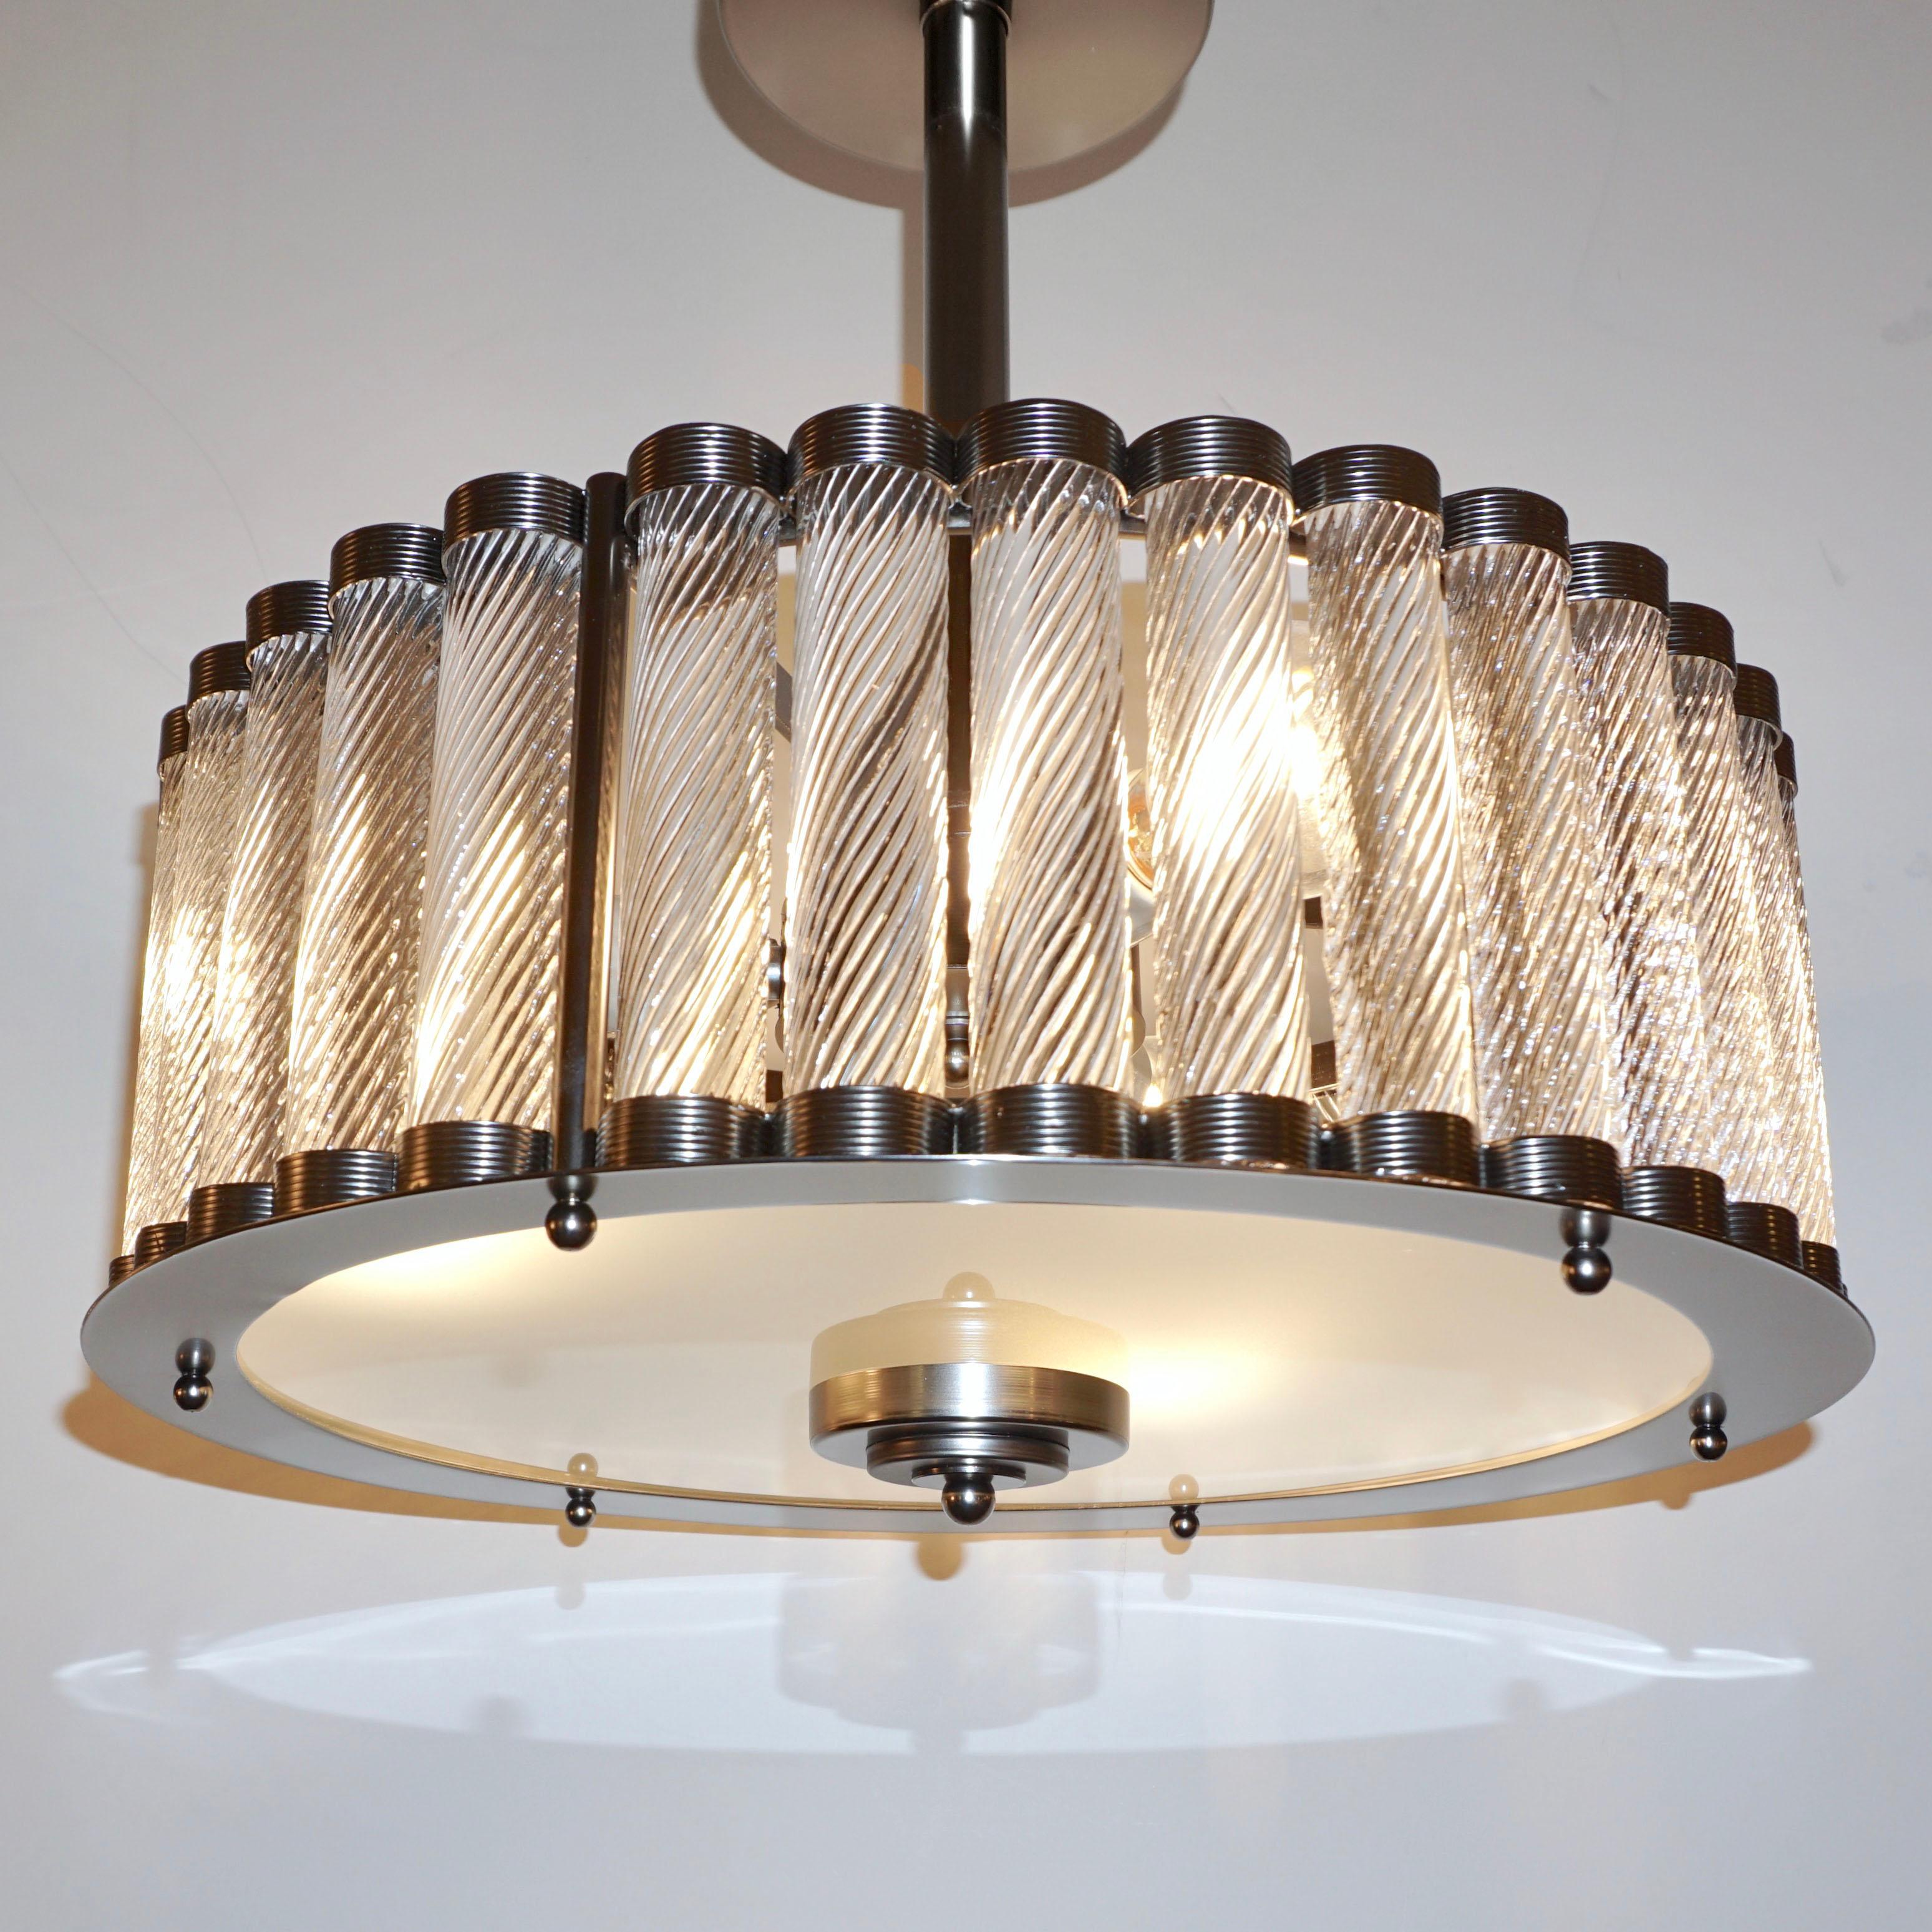 Contemporary Italian Art Deco Design customizable round chandelier/pendant of drum shape, entirely handcrafted, with a dark steel pewter metal finish. The nicely scalloped airy structure supports crystal clear Murano glass rods, each individually